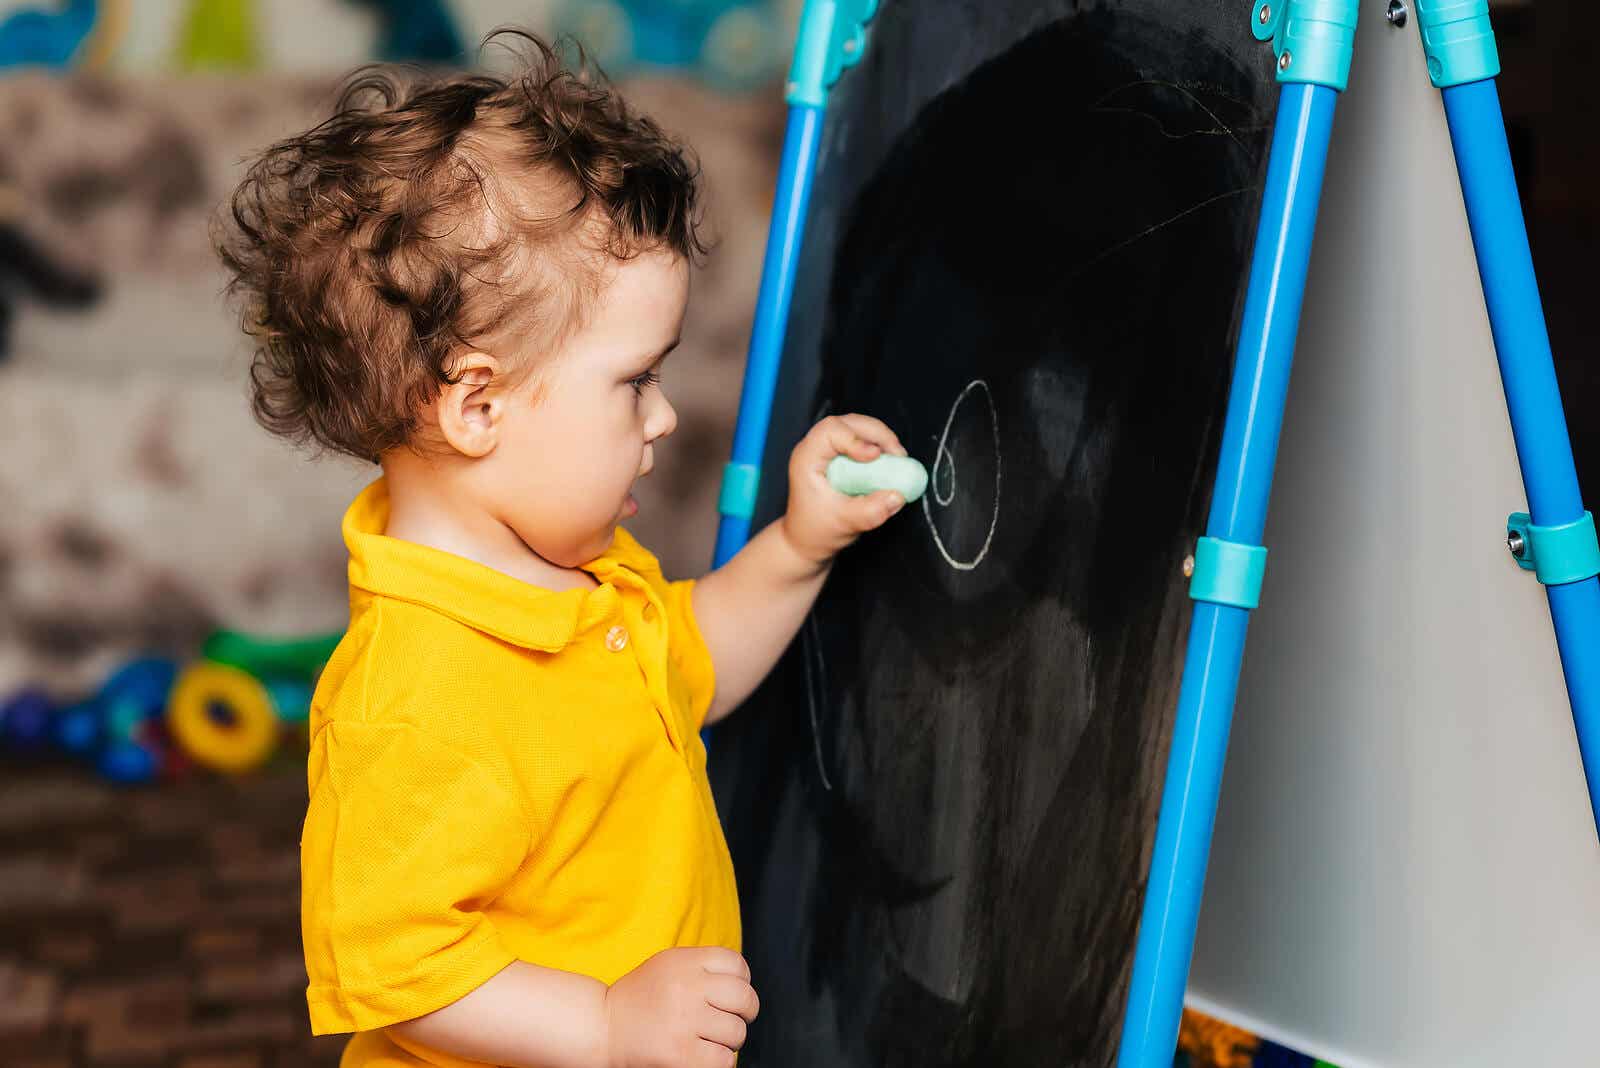 A toddler scribbling on a chalkboard.